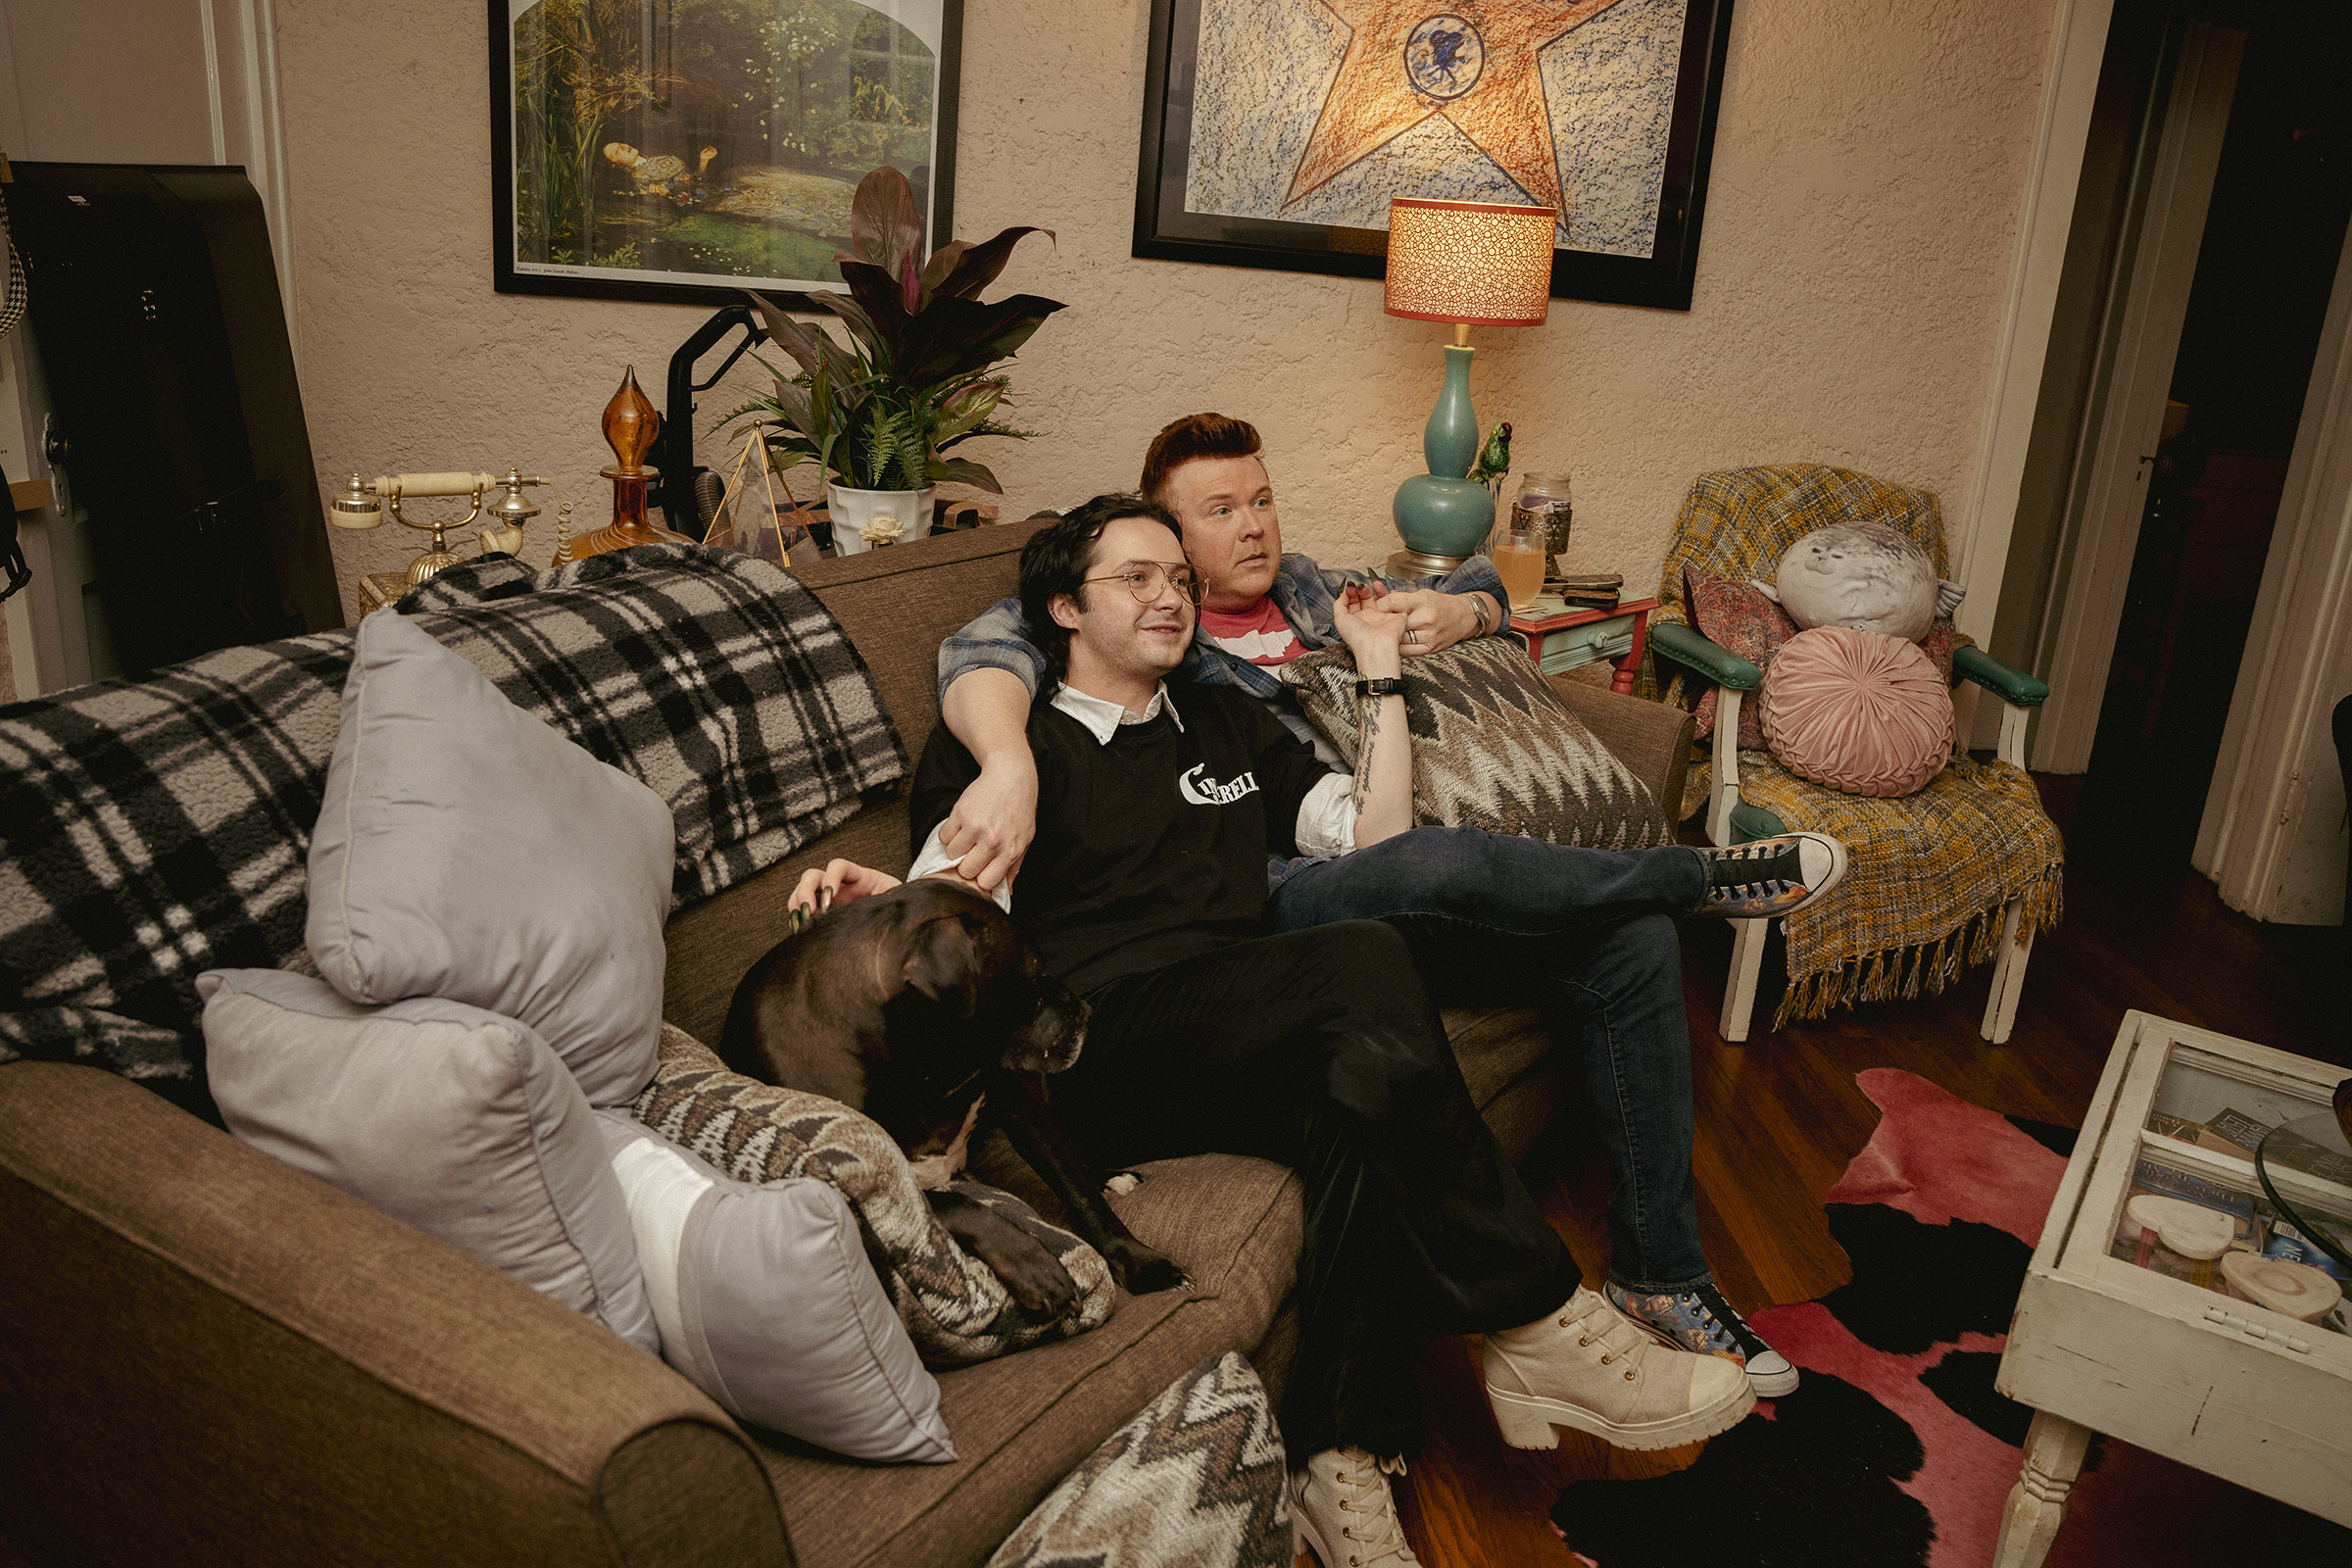 Kelly McDaniel (right) and his husband Austin Wood-McDaniel (left) hang out in their living room after working their day jobs on March 29.